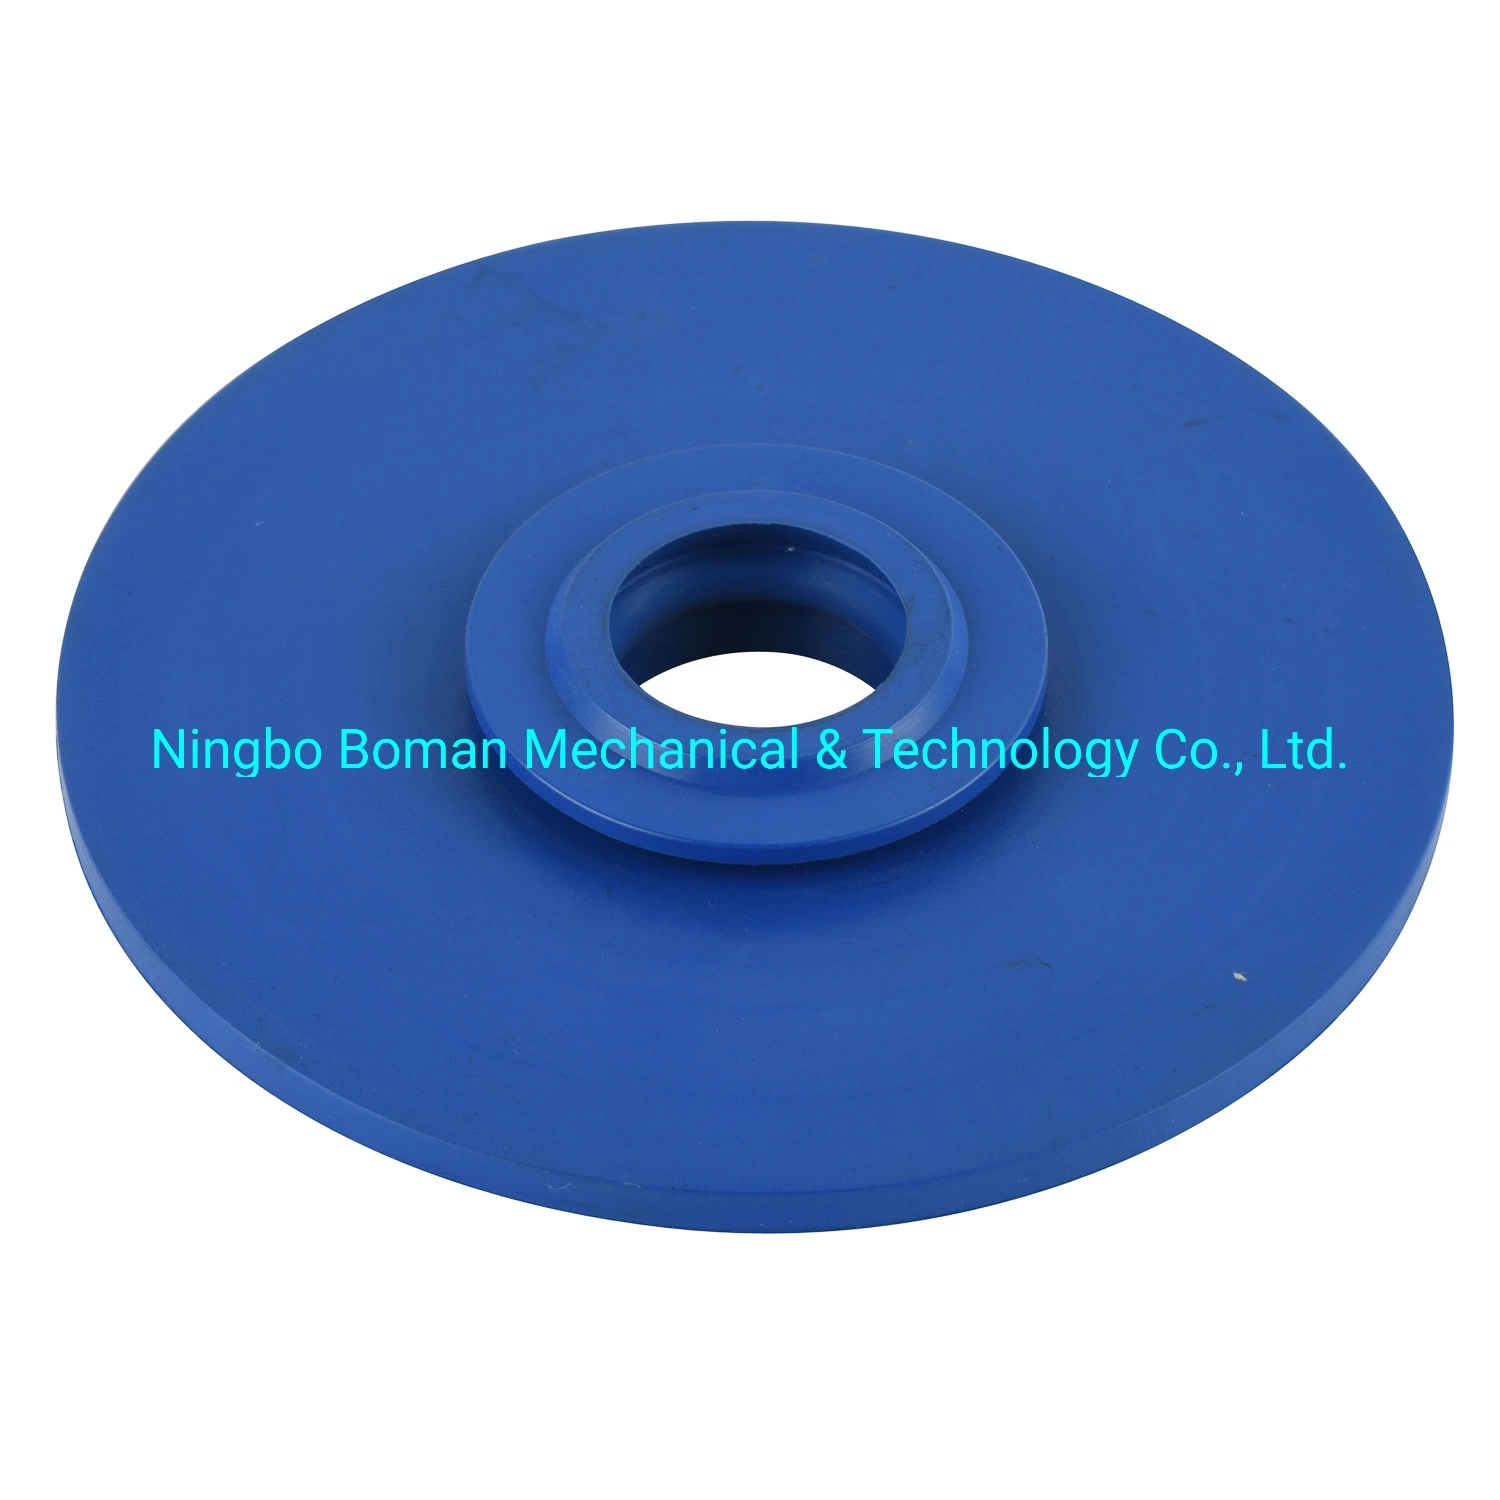 Metal Detectable Rubber Parts Rubber Product in Molded